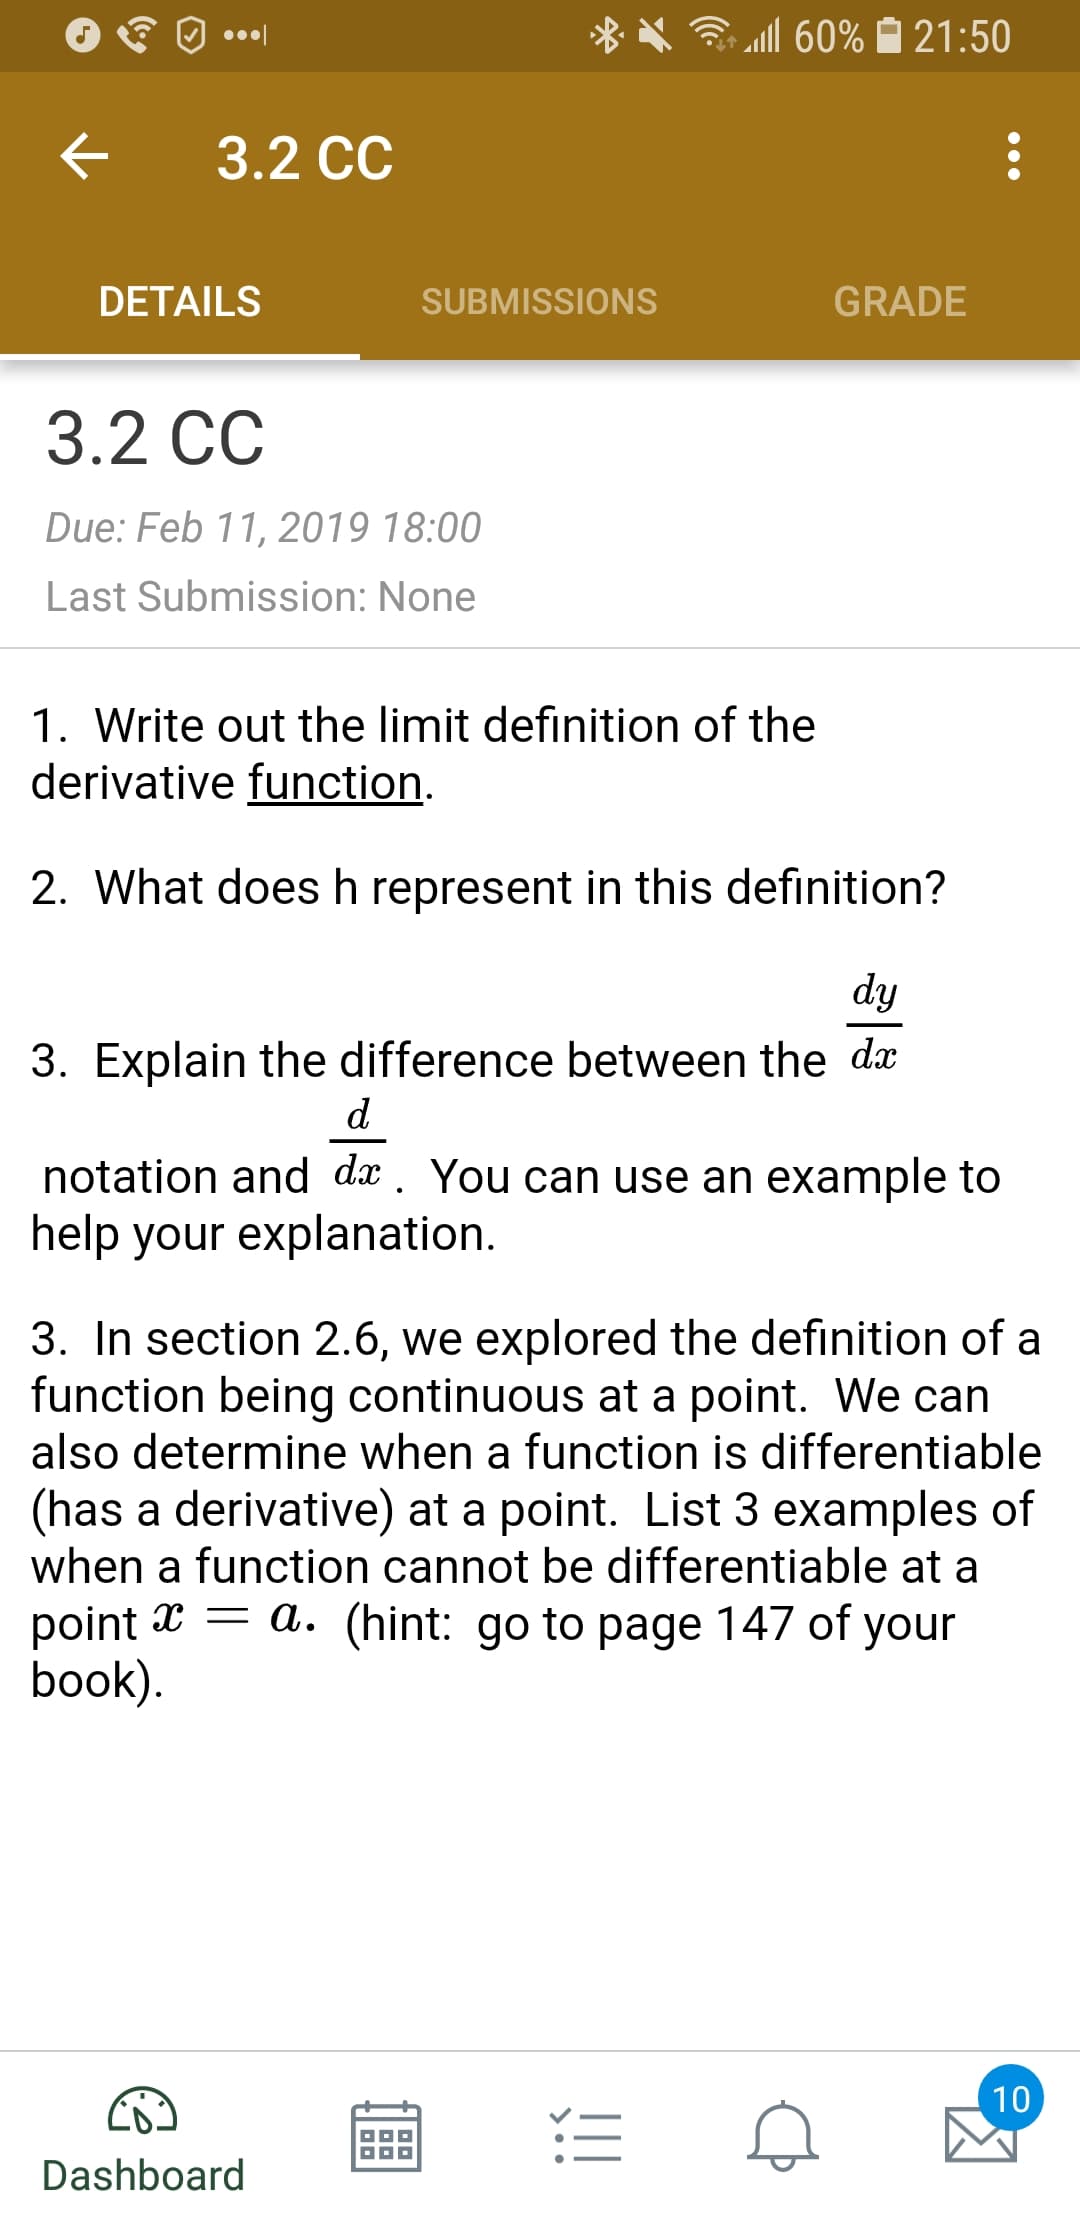 X .111 60% 21:50
< 3.2 cc
DETAILS
SUBMISSIONS
GRADE
3.2 CC
Due: Feb 11, 2019 18:00
Last Submission: None
1. Write out the limit definition of the
derivative function
2. What does h represent in this definition?
3. Explain the difference between the dx
notation and dx. You can use an example to
help your explanation
3. In section 2.6, we explored the definition of a
function being continuous at a point. We can
also determine when a function is differentiable
(has a derivative) at a point. List 3 examples of
when a function cannot be differentiable at a
point x - a. (hint: go to page 147 of your
book
Dashboard
